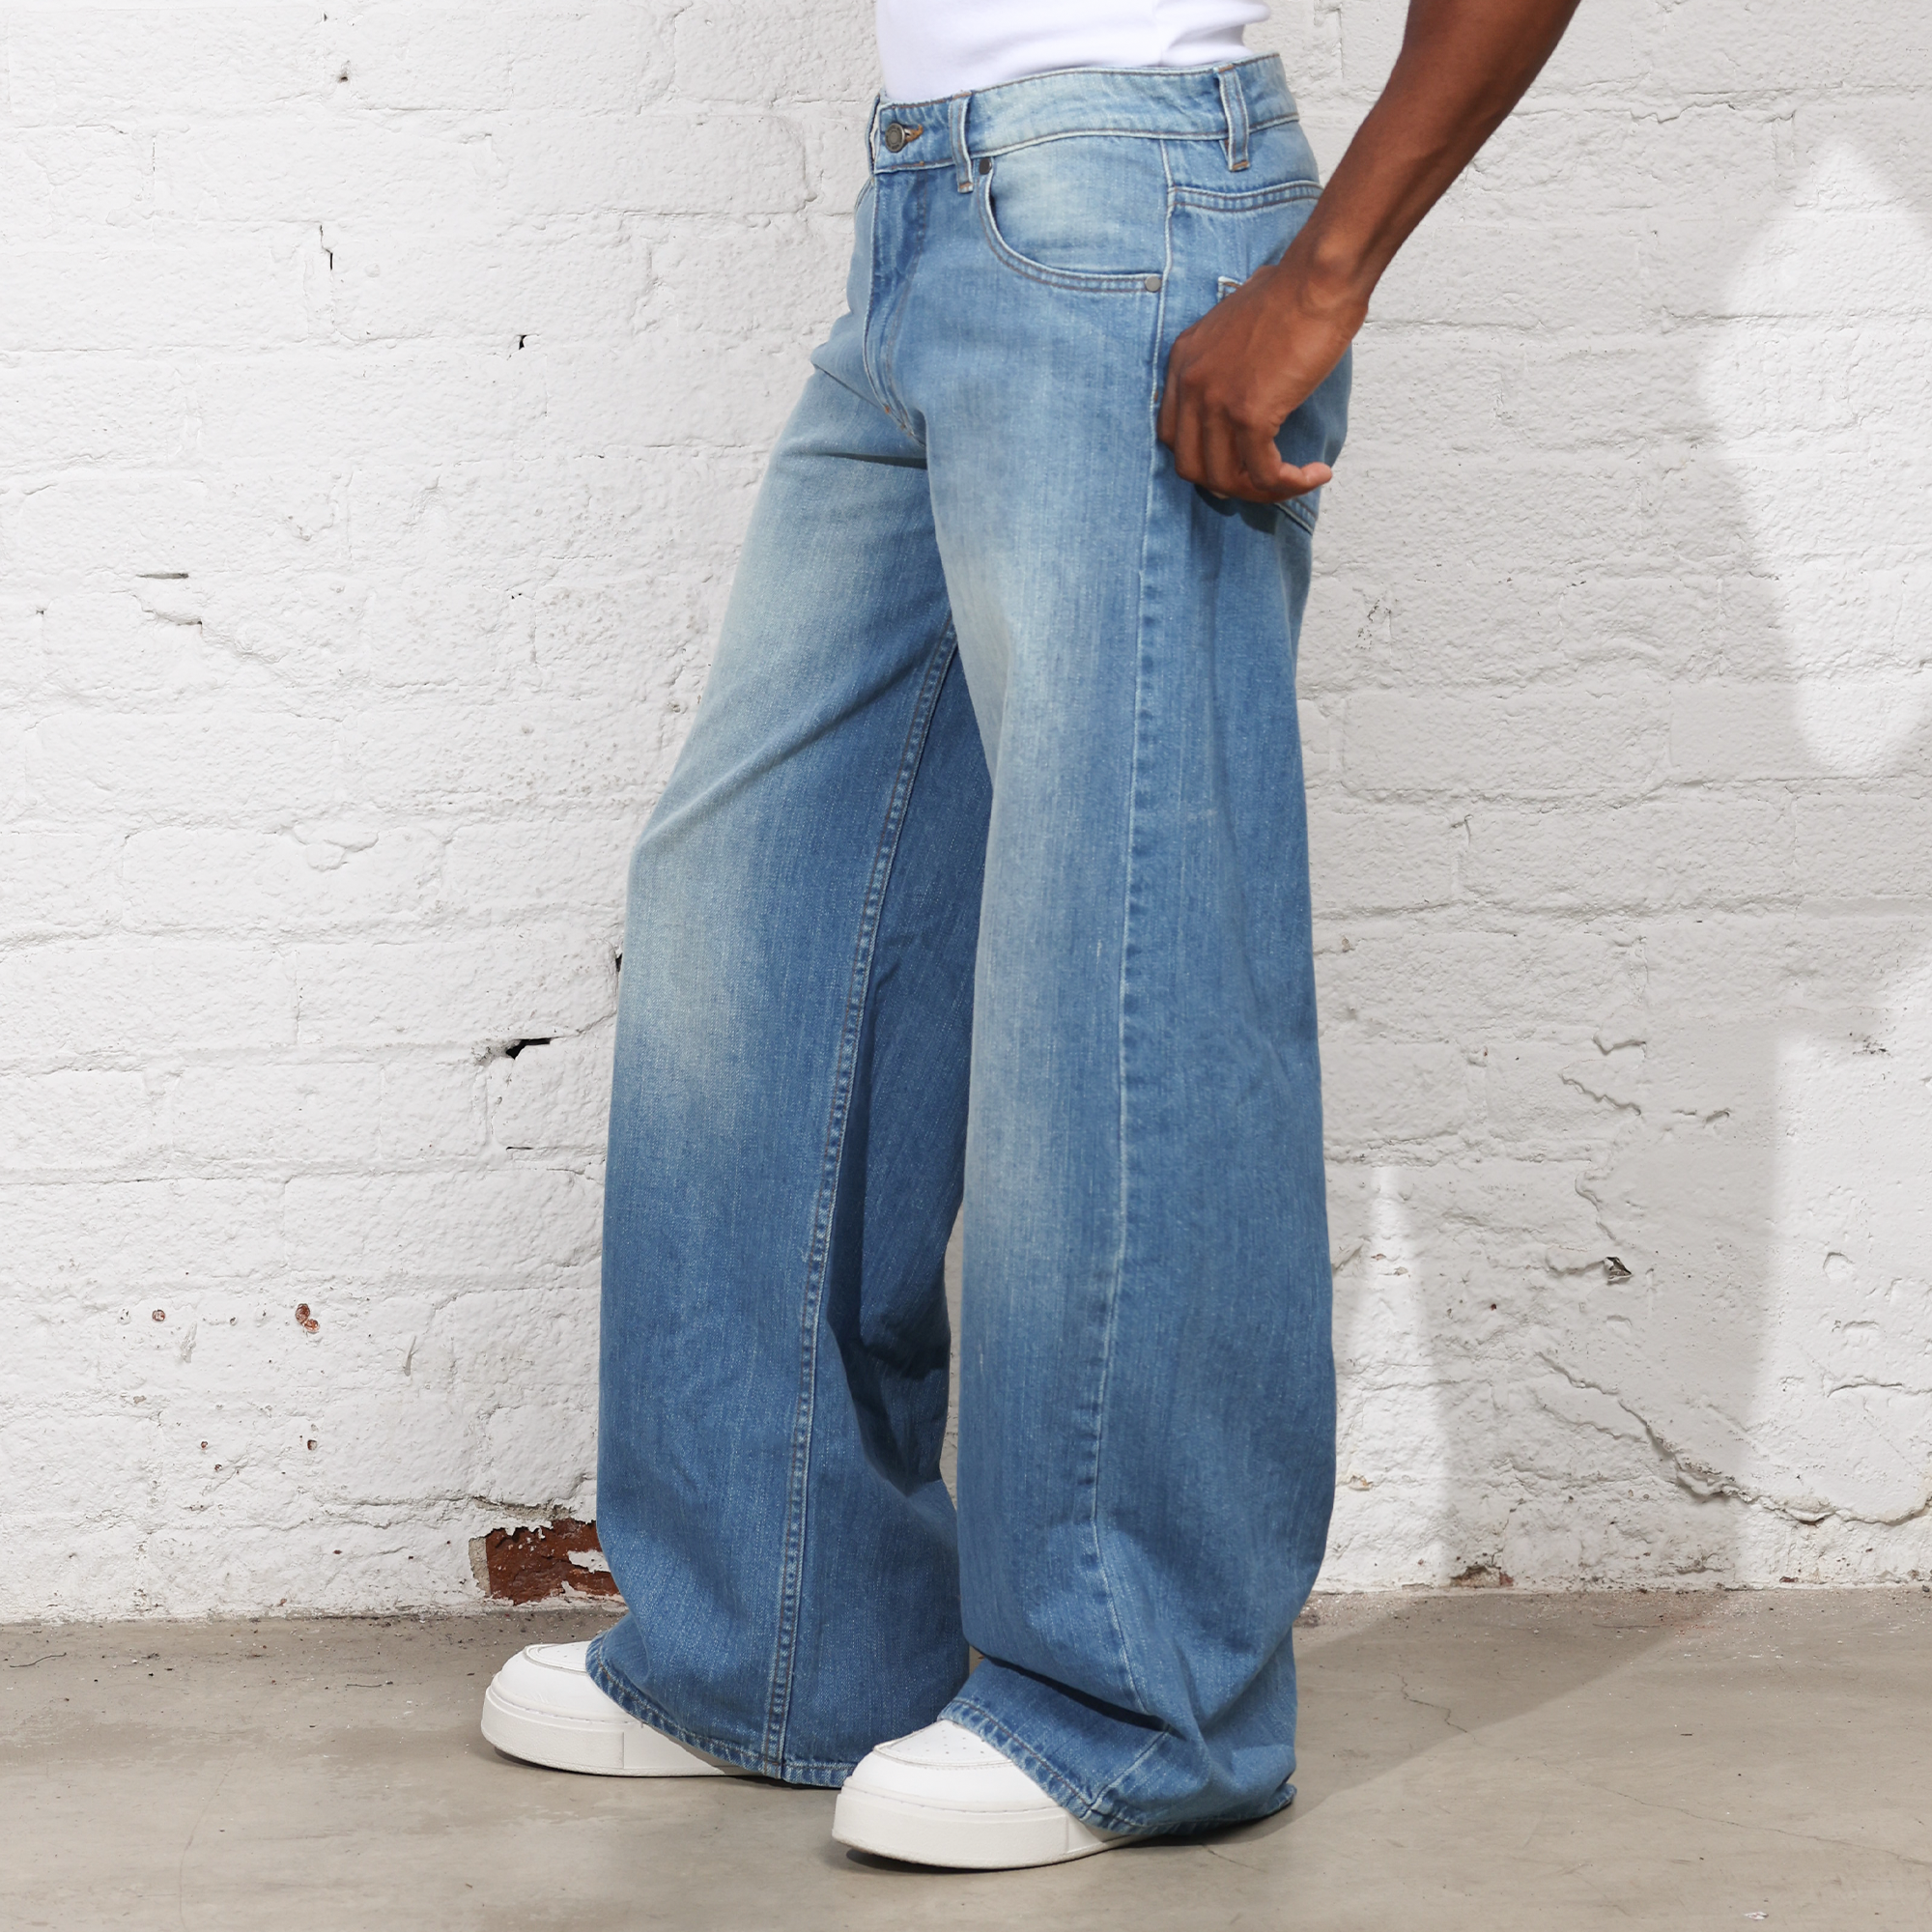 The Tokyo Dad Jeans